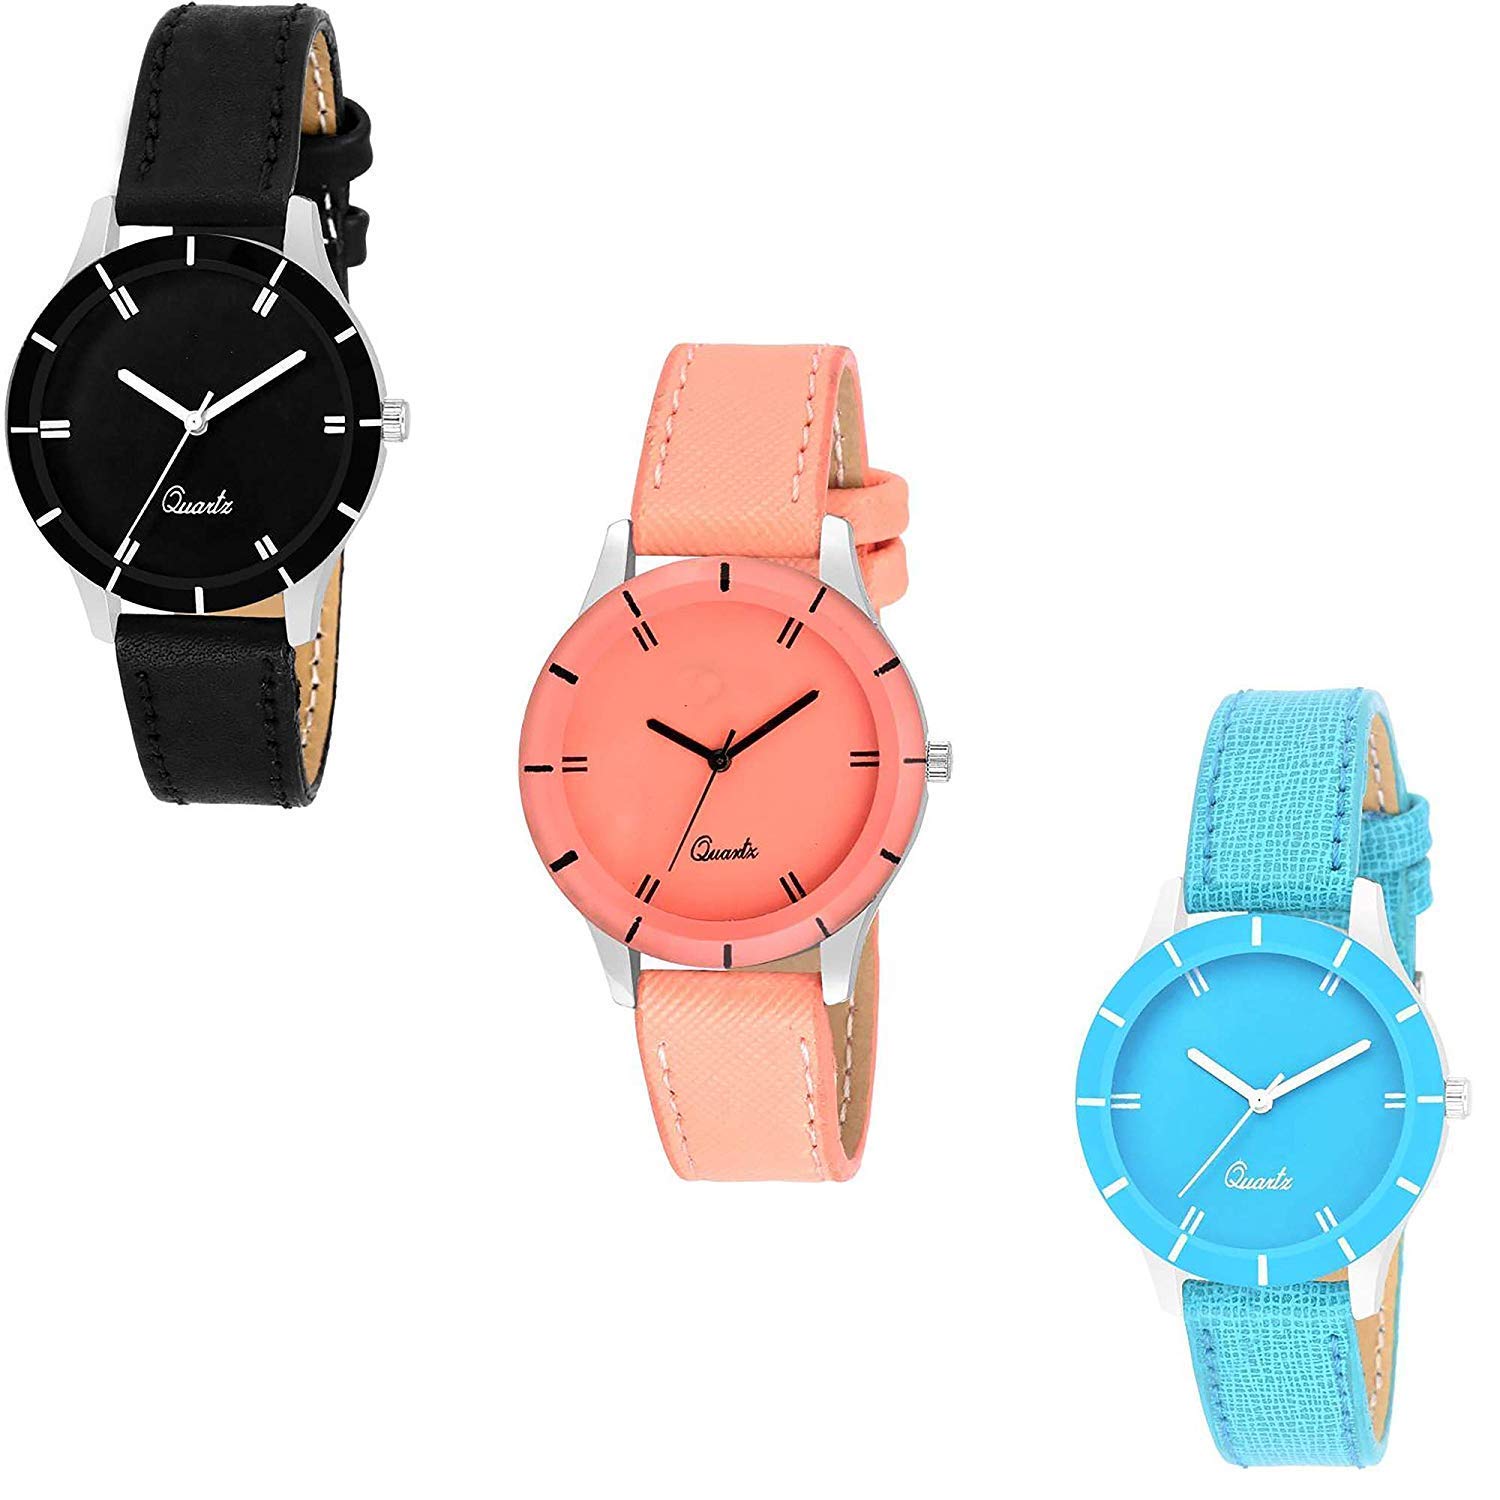 Acnos® Premium Analogue Men's Watch (Pack of 3) (Multicolored Dial  Multicolored Colored Strap) : Amazon.in: Fashion